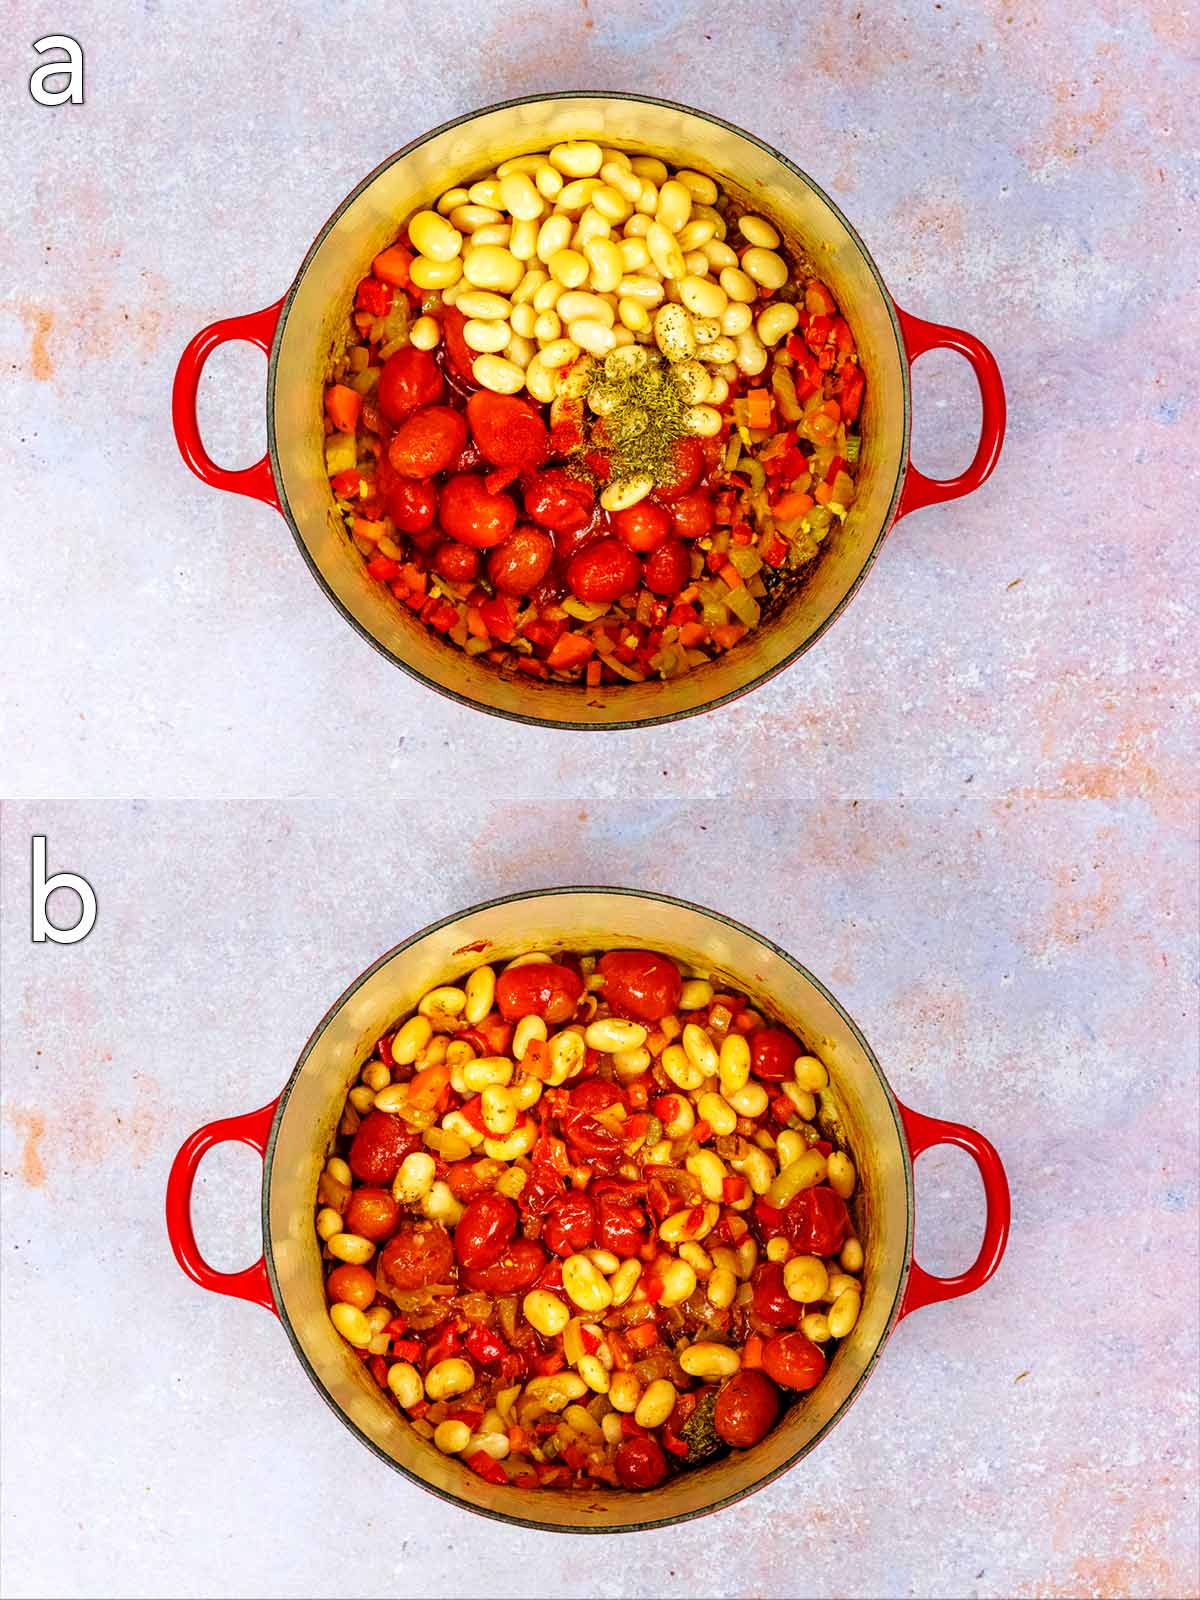 Beens, herbs and tomatoes added to the pan. Before and after shots of mixing.